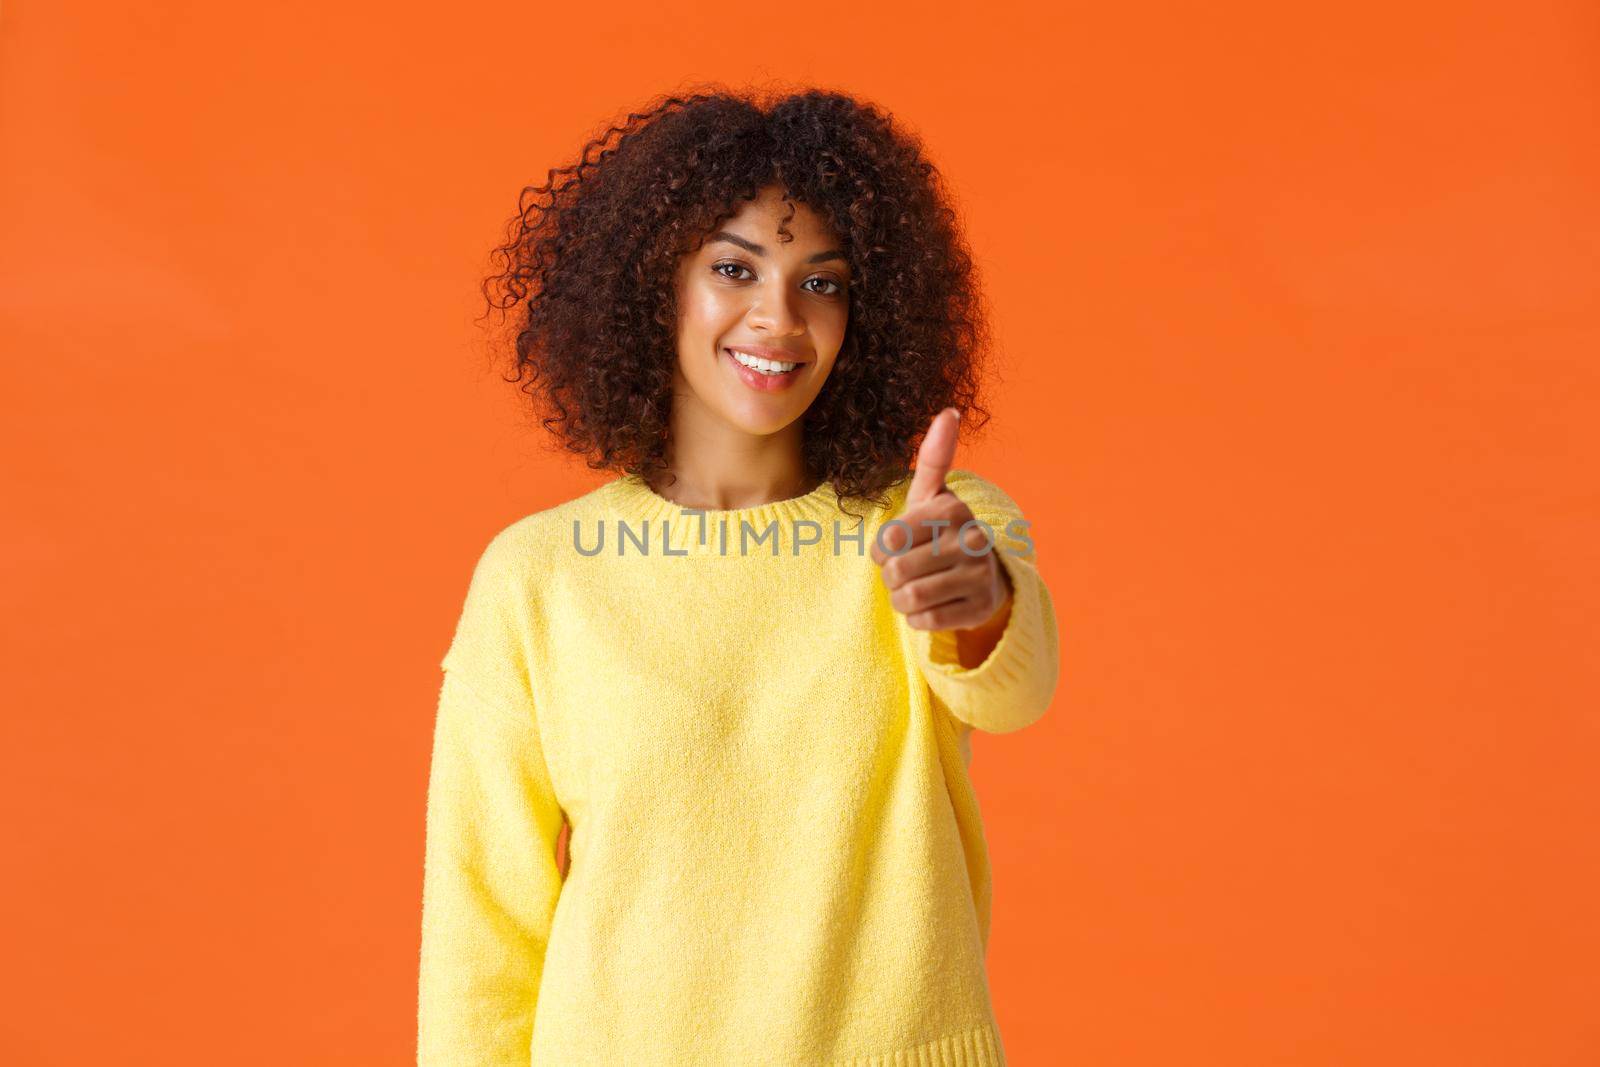 Waist-up portrait cheerful satisfied girl made her final choice, showing thumb-up in approval or like, recommend product, nod agreement, smiling delighted, standing orange background.